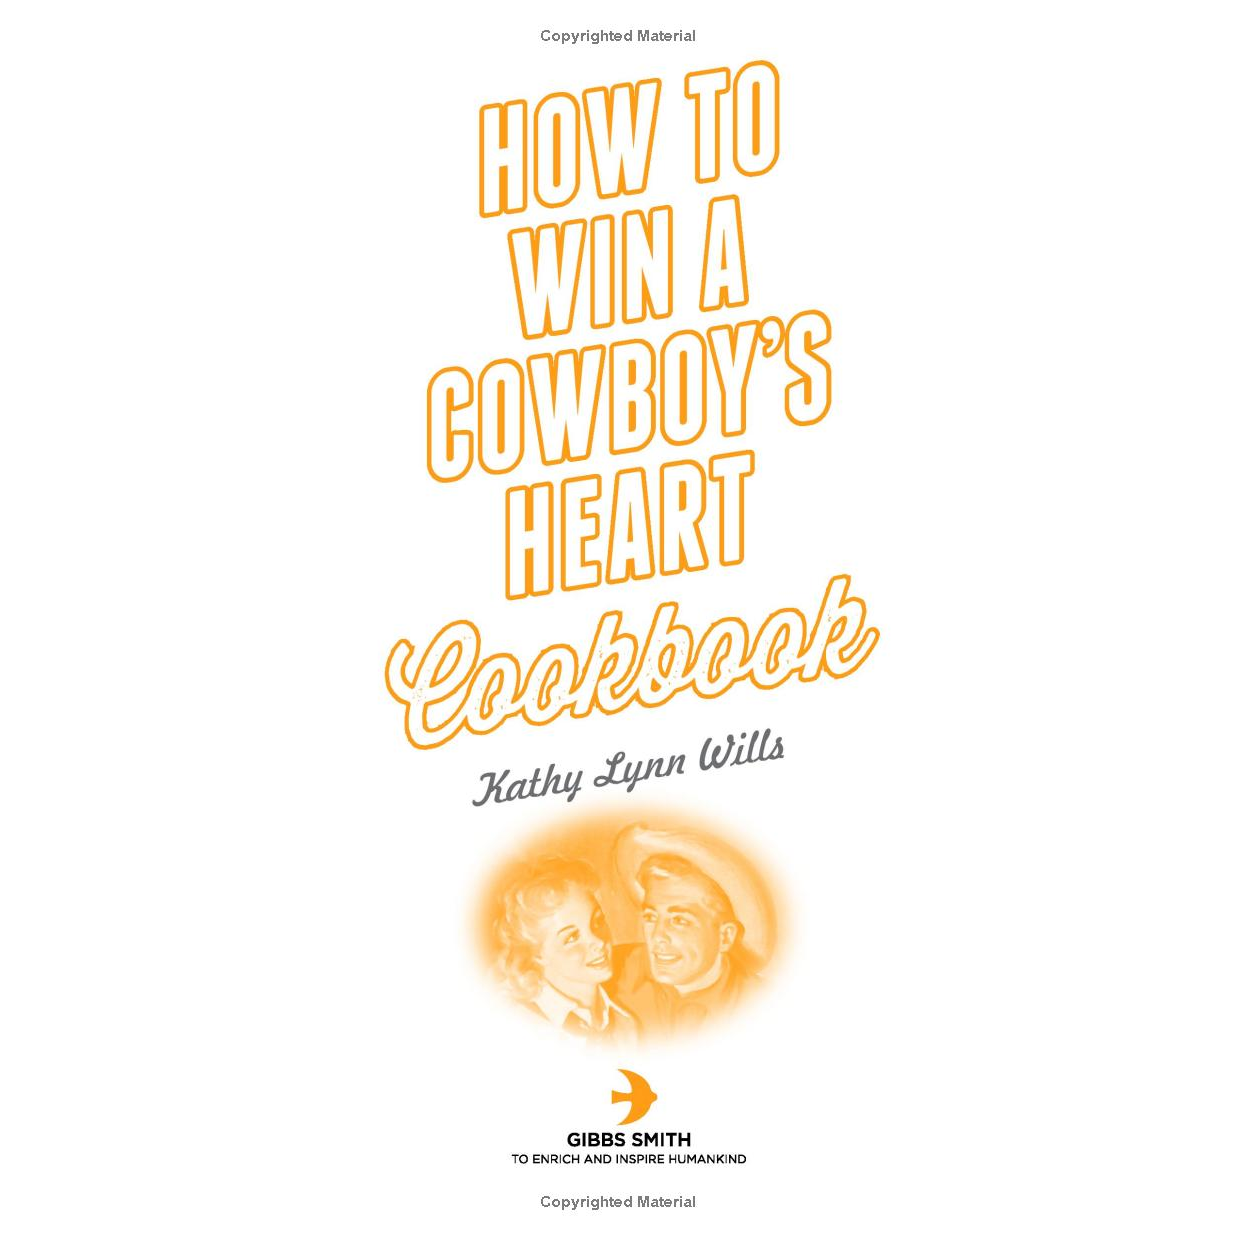 How to Win a Cowboy's Heart Cookbook by Kathy Lynn Wills